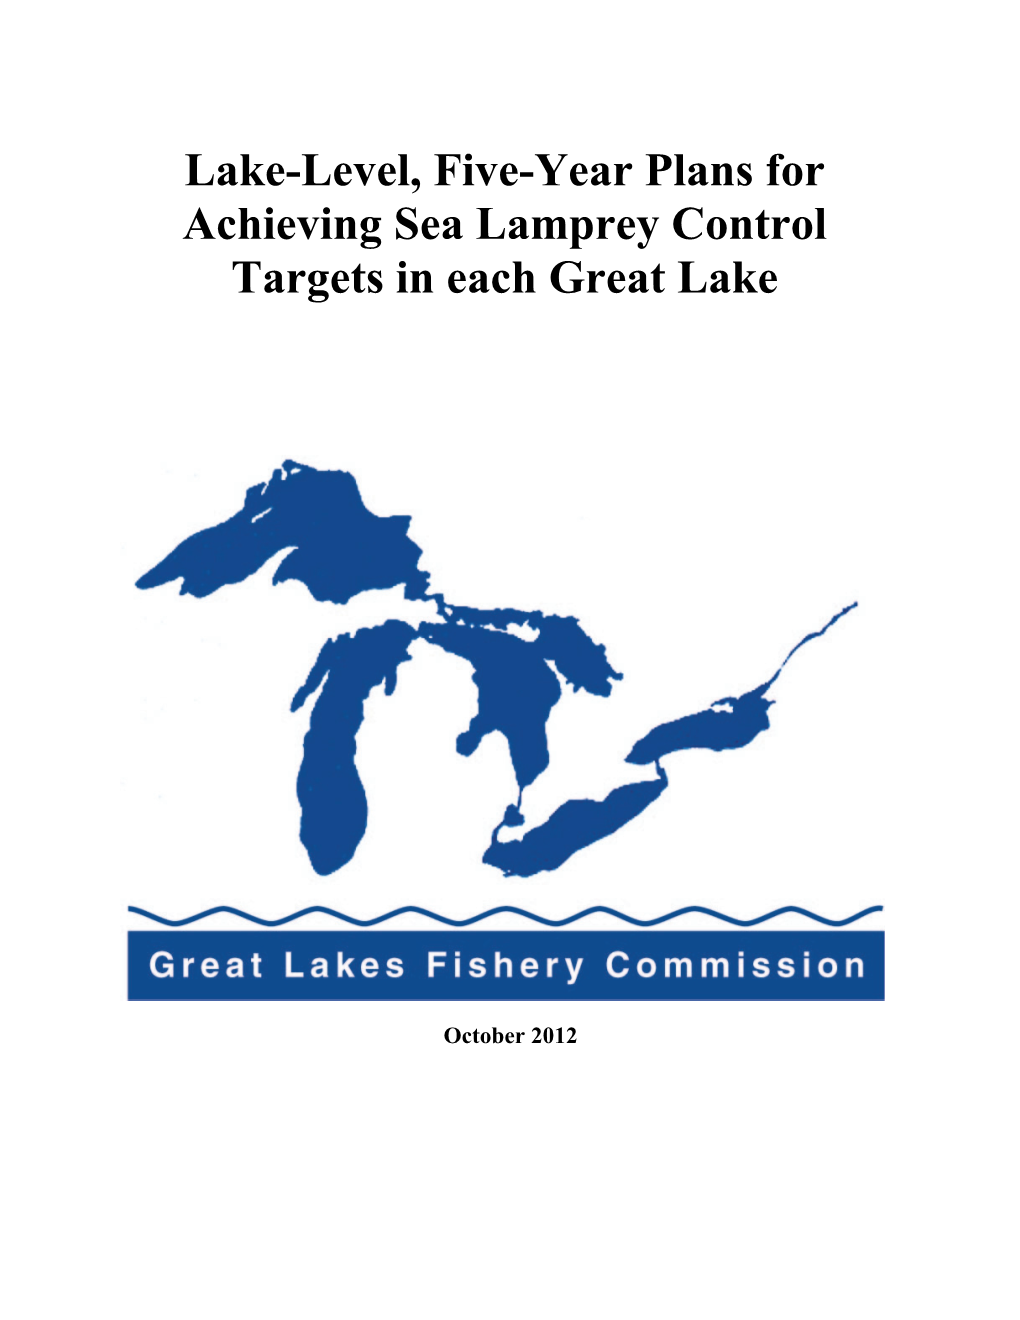 Lake-Level, Five-Year Plans for Achieving Sea Lamprey Control Targets in Each Great Lake